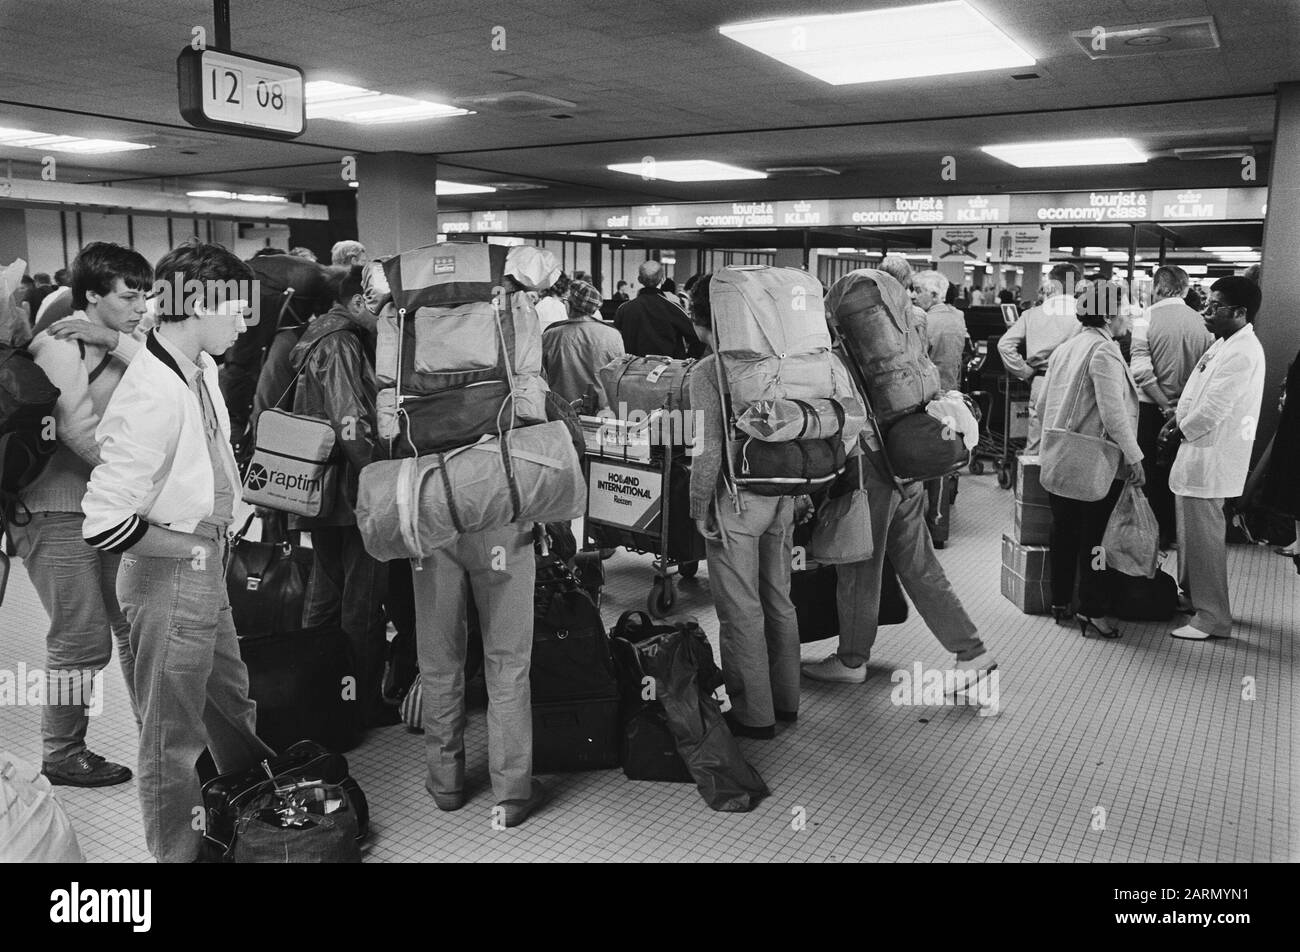 Holiday print at Schiphol  Holidaymakers with backpacks Date: 1 July 1983 Location: Noord-Holland, Schiphol Keywords: arrival and departure, crowd, mood images, holiday Institution name: Schiphol Stock Photo